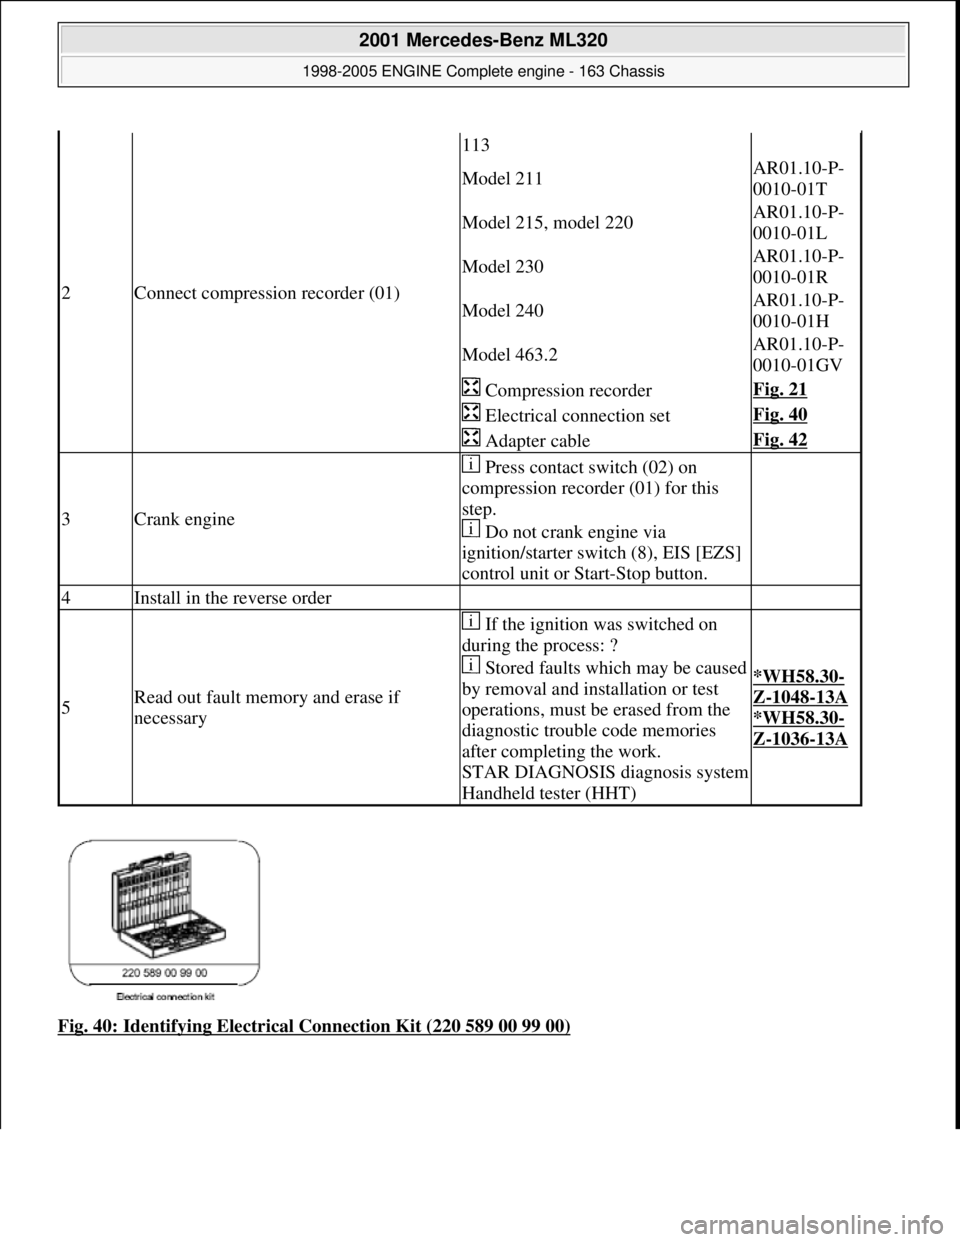 MERCEDES-BENZ ML500 1997  Complete Repair Manual Fig. 40: Identifying Electrical Connection Kit (220 589 00 99 00)
2Connect compression recorder (01)
113
Model 211AR01.10-P- 
0010-01T
Model 215, model 220AR01.10-P-
0010-01L
Model 230AR01.10-P-
0010-